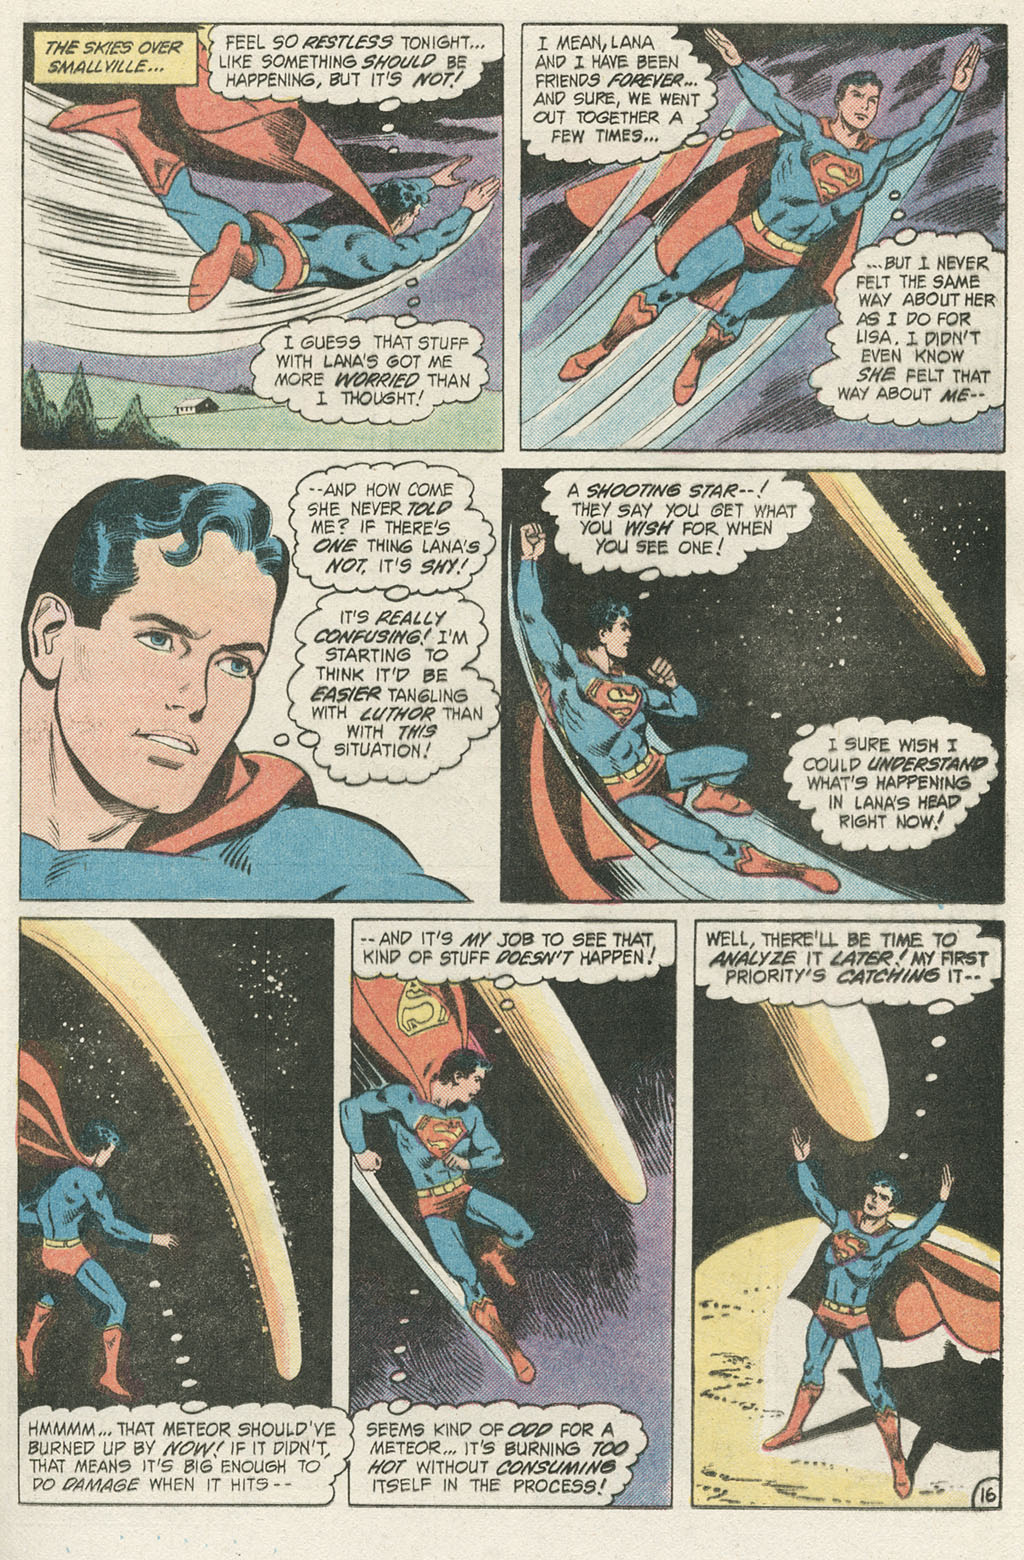 The New Adventures of Superboy 53 Page 19